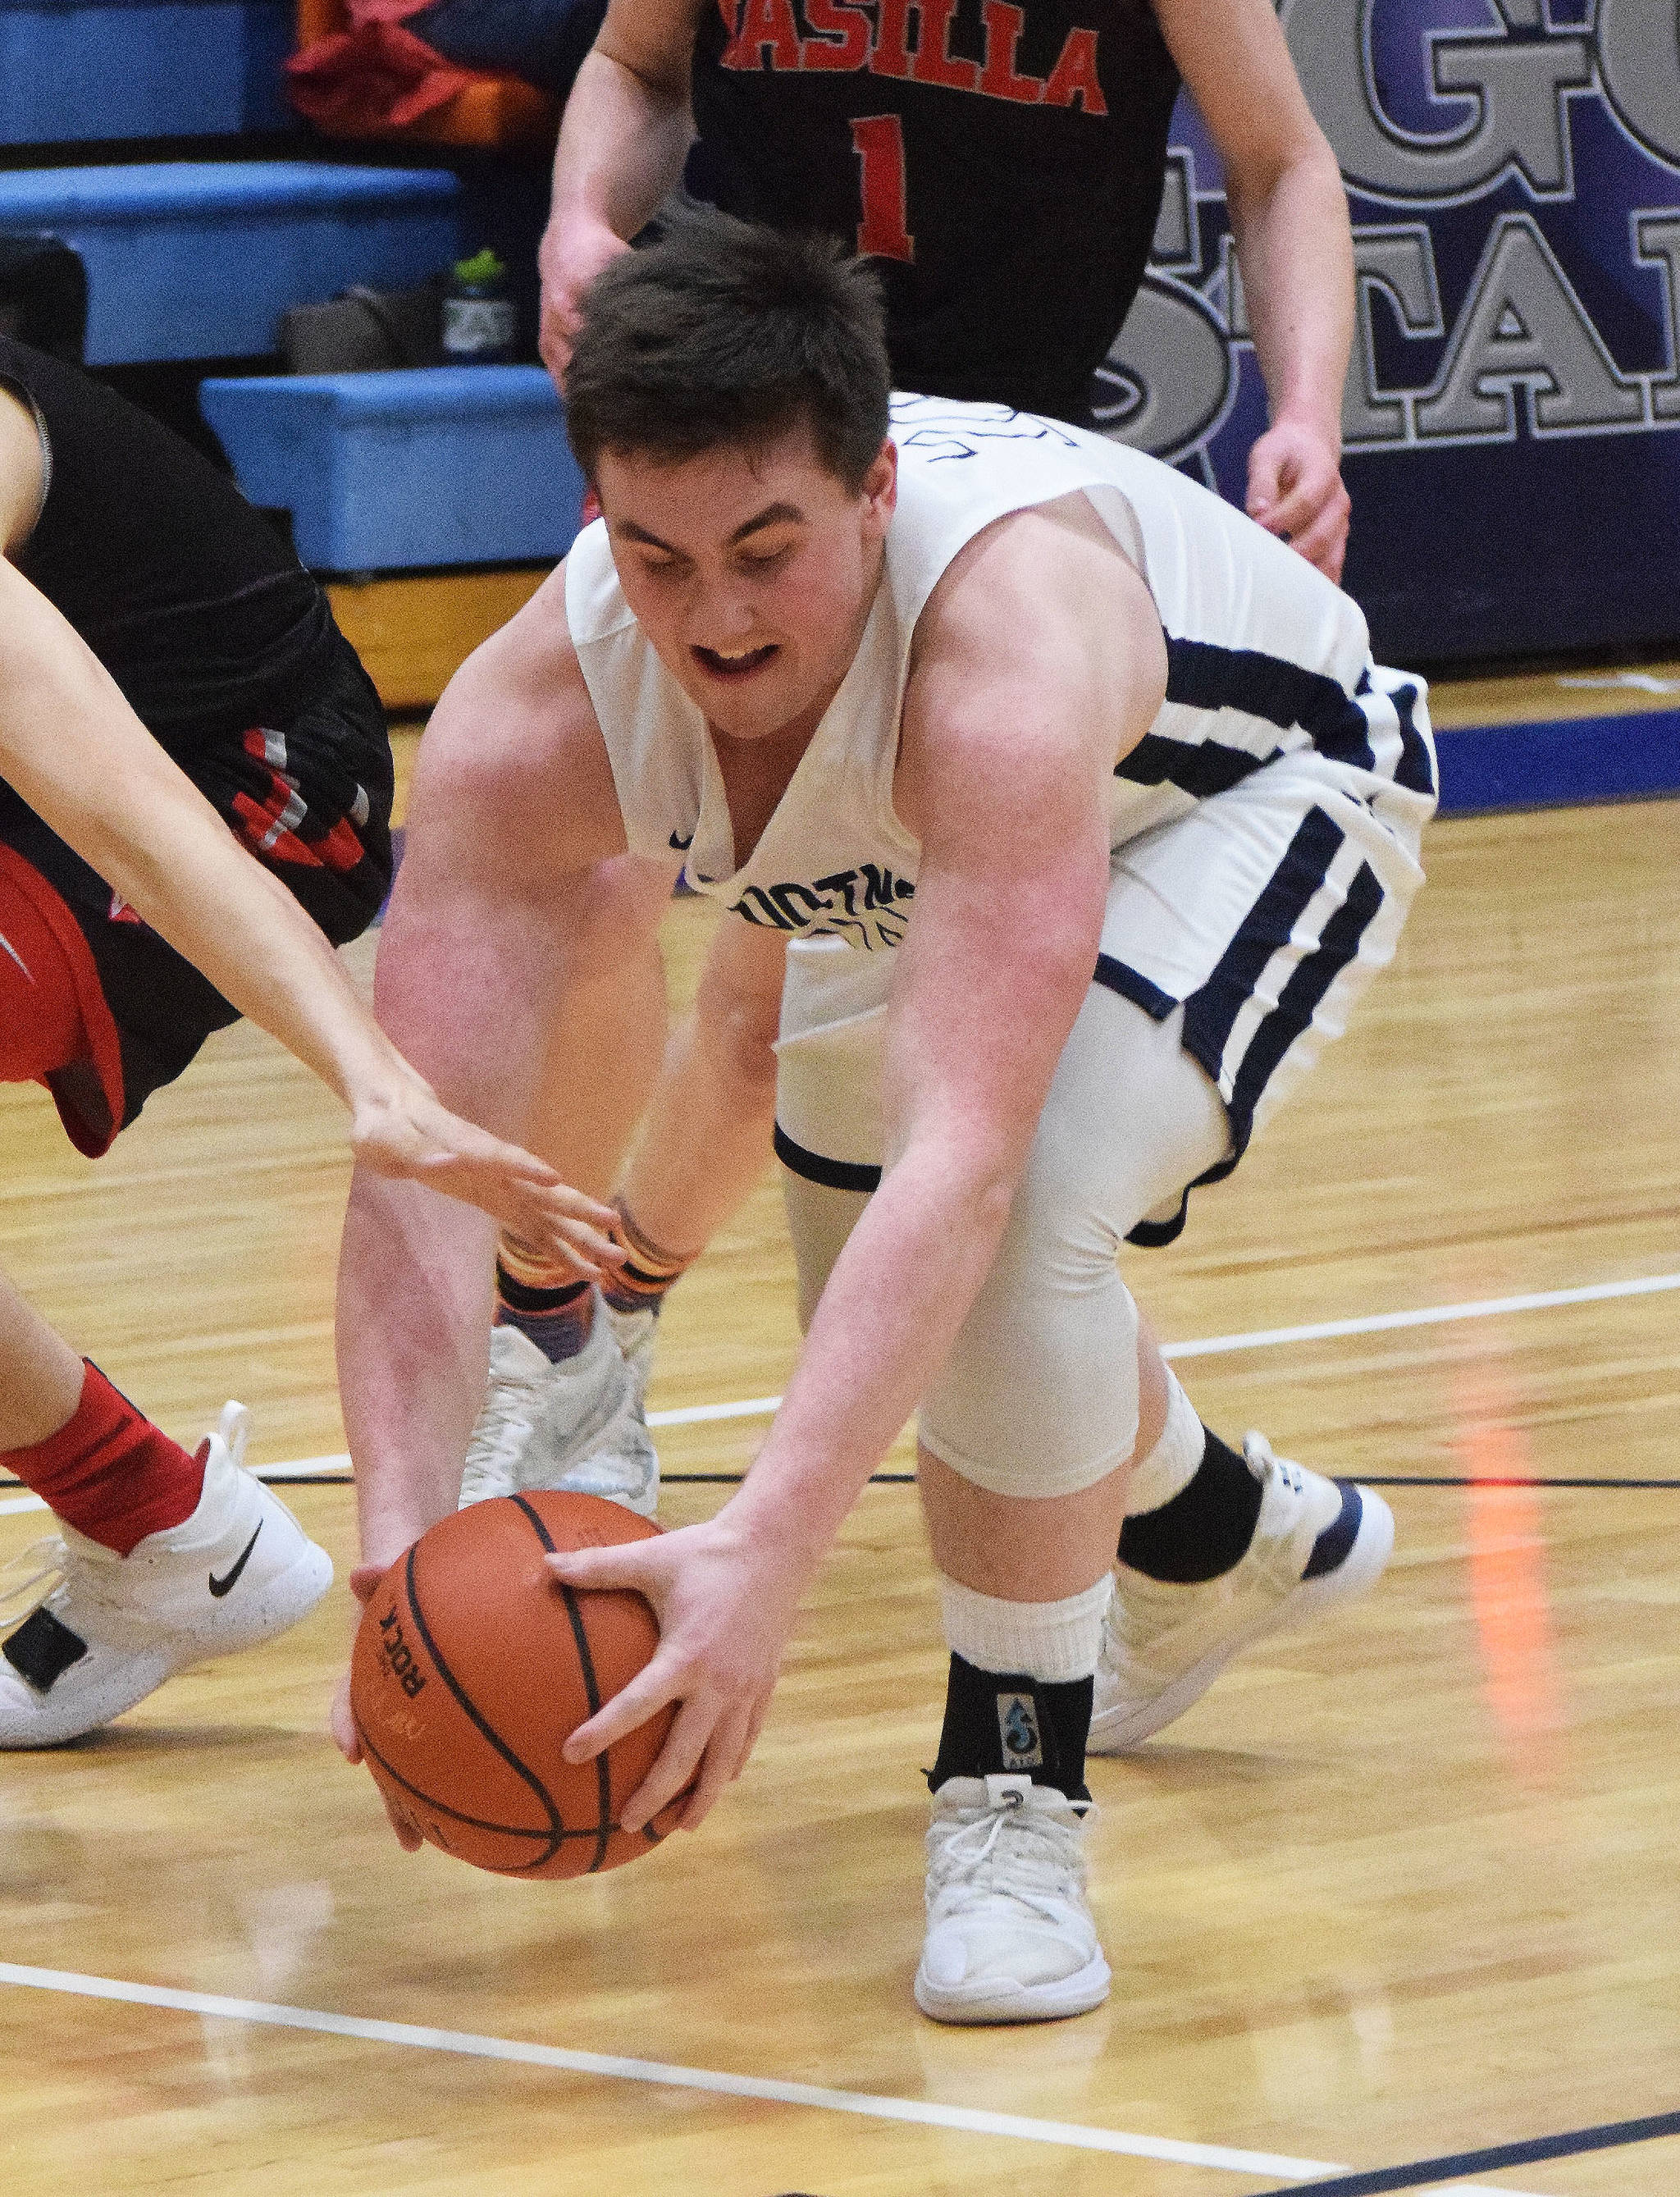 Soldotna’s Brock Kant goes scrambling after a loose ball Friday night in a conference meeting at Soldotna High School. (Photo by Joey Klecka/Peninsula Clarion)